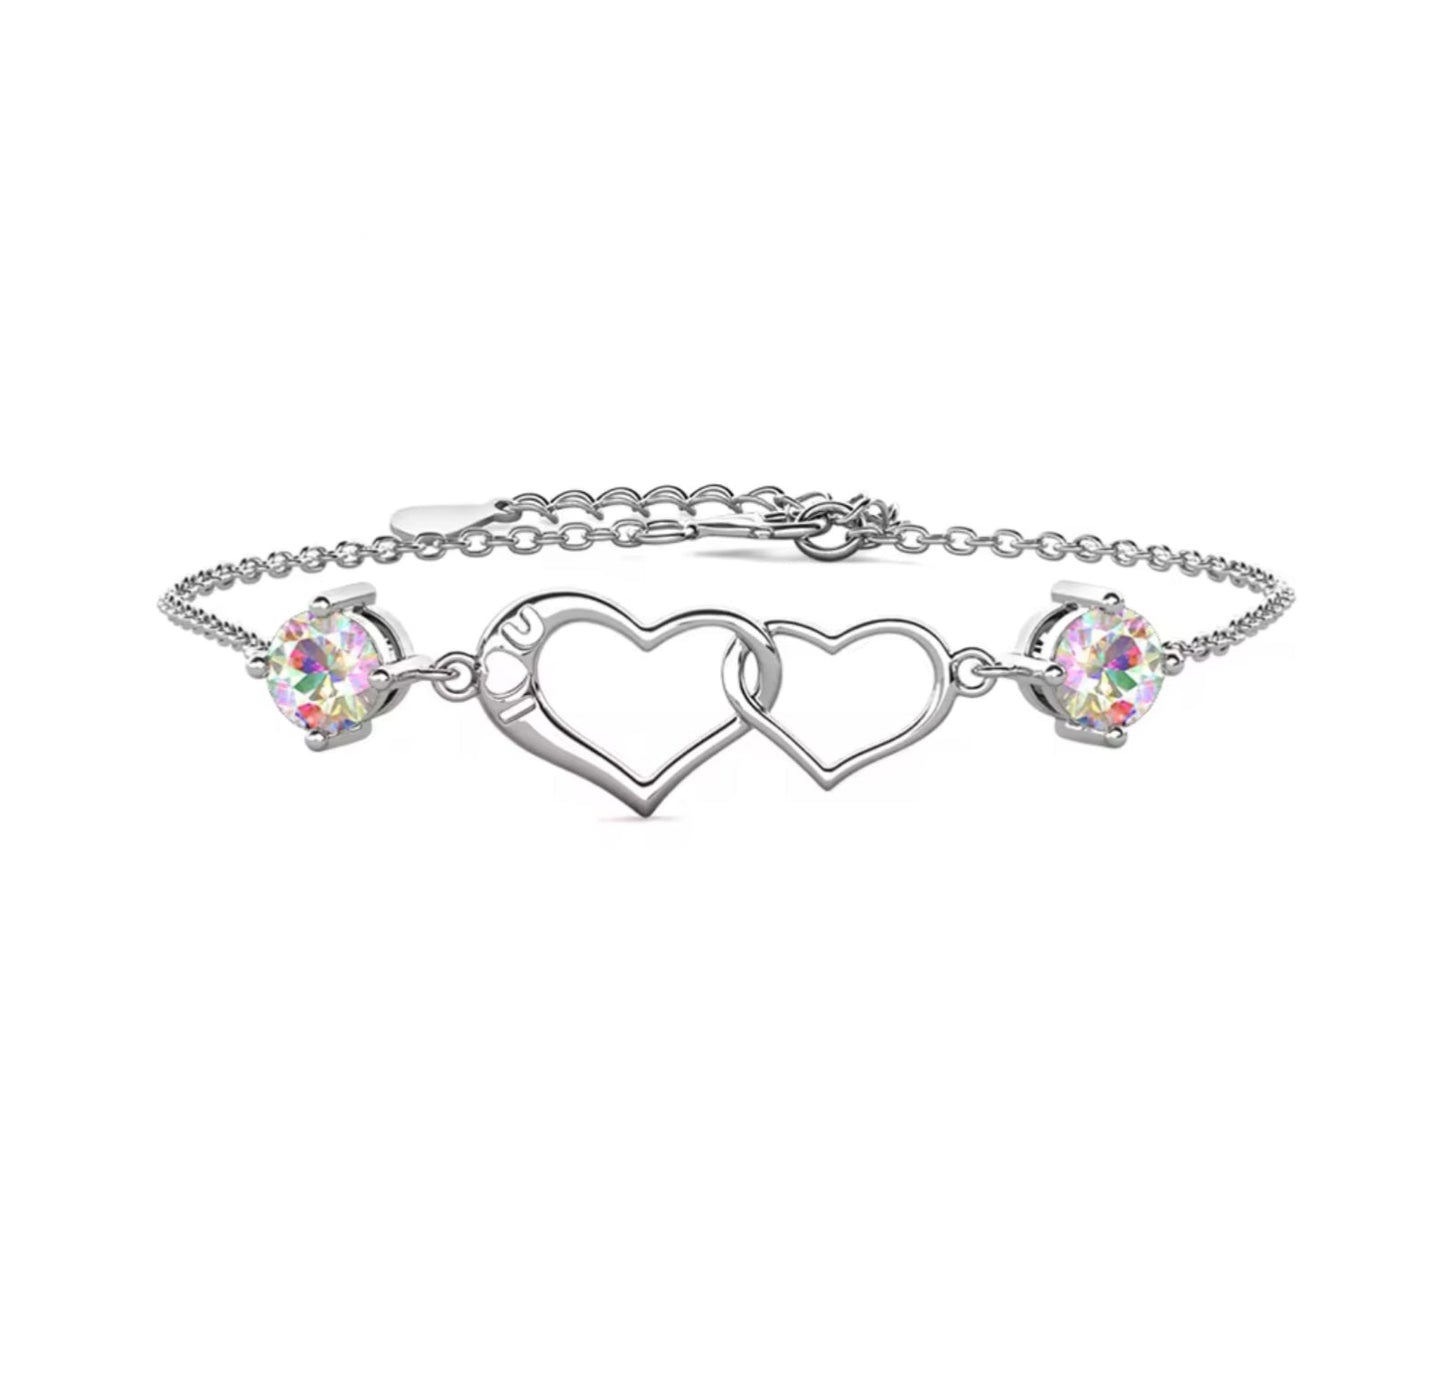 Heart motif bracelet in a variety of colors